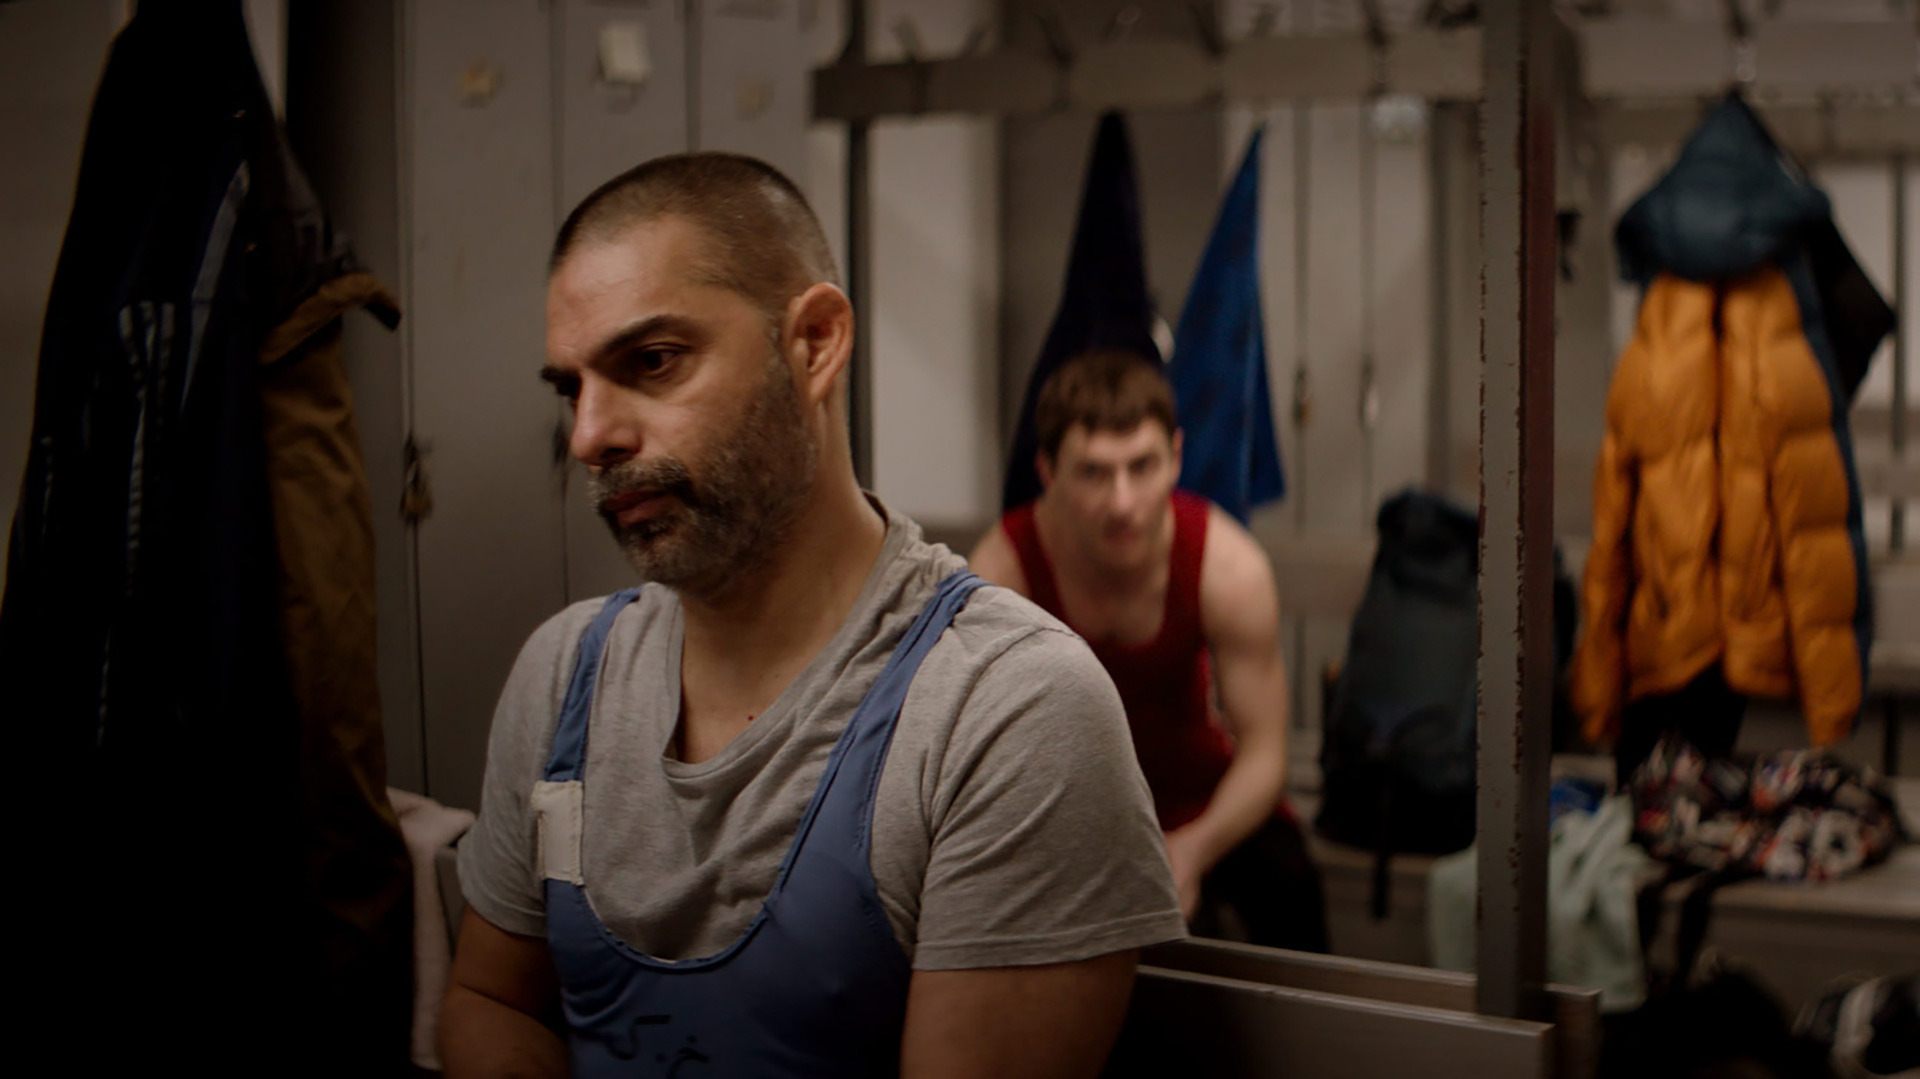 Opponent stars Payman Maadi as Iman, an Iranian refugee who turns to wrestling to speed up his asylum application